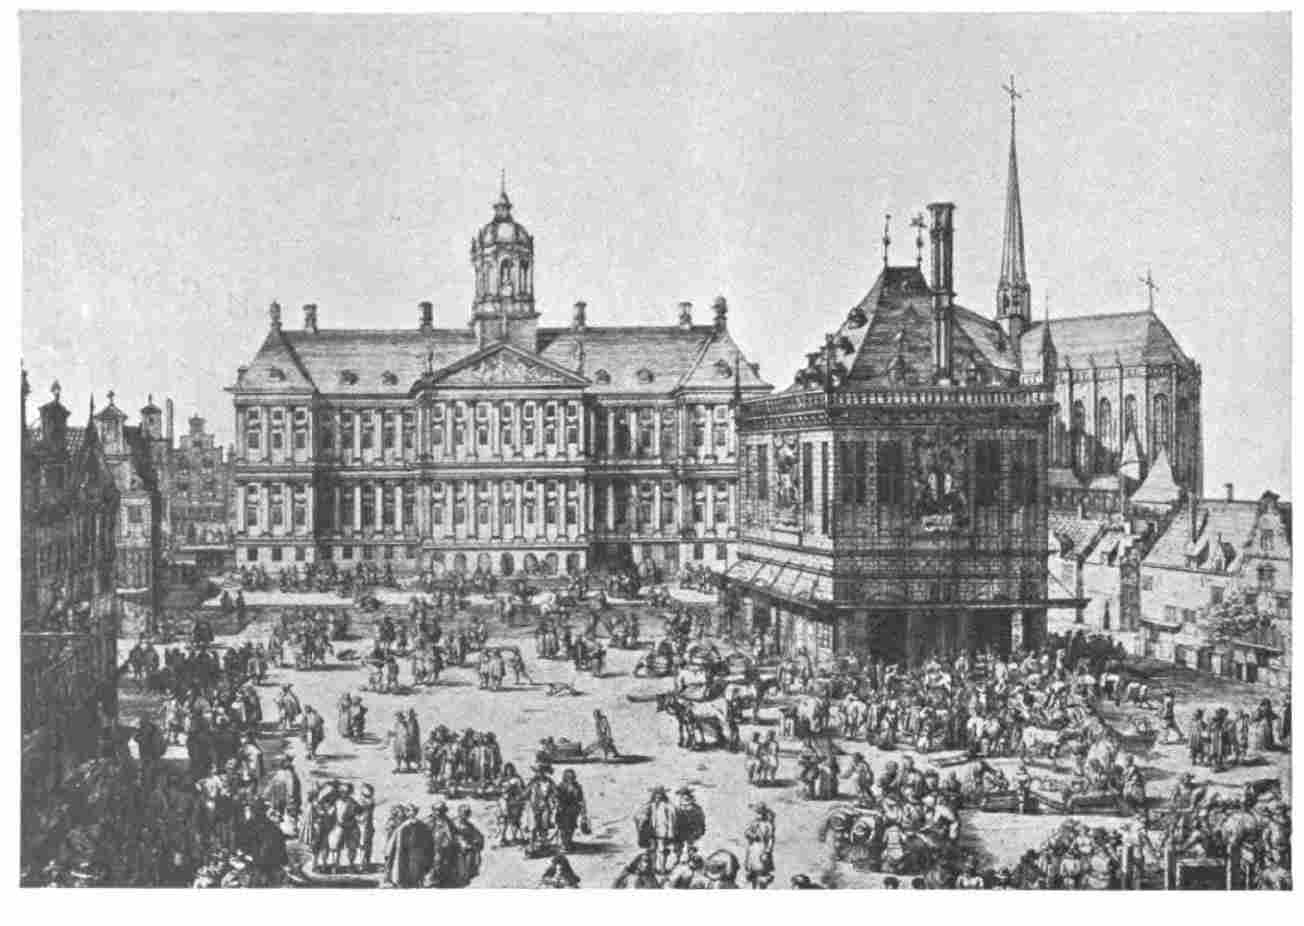 Plate 4. The New Town-Hall in Amsterdam, about 1660.